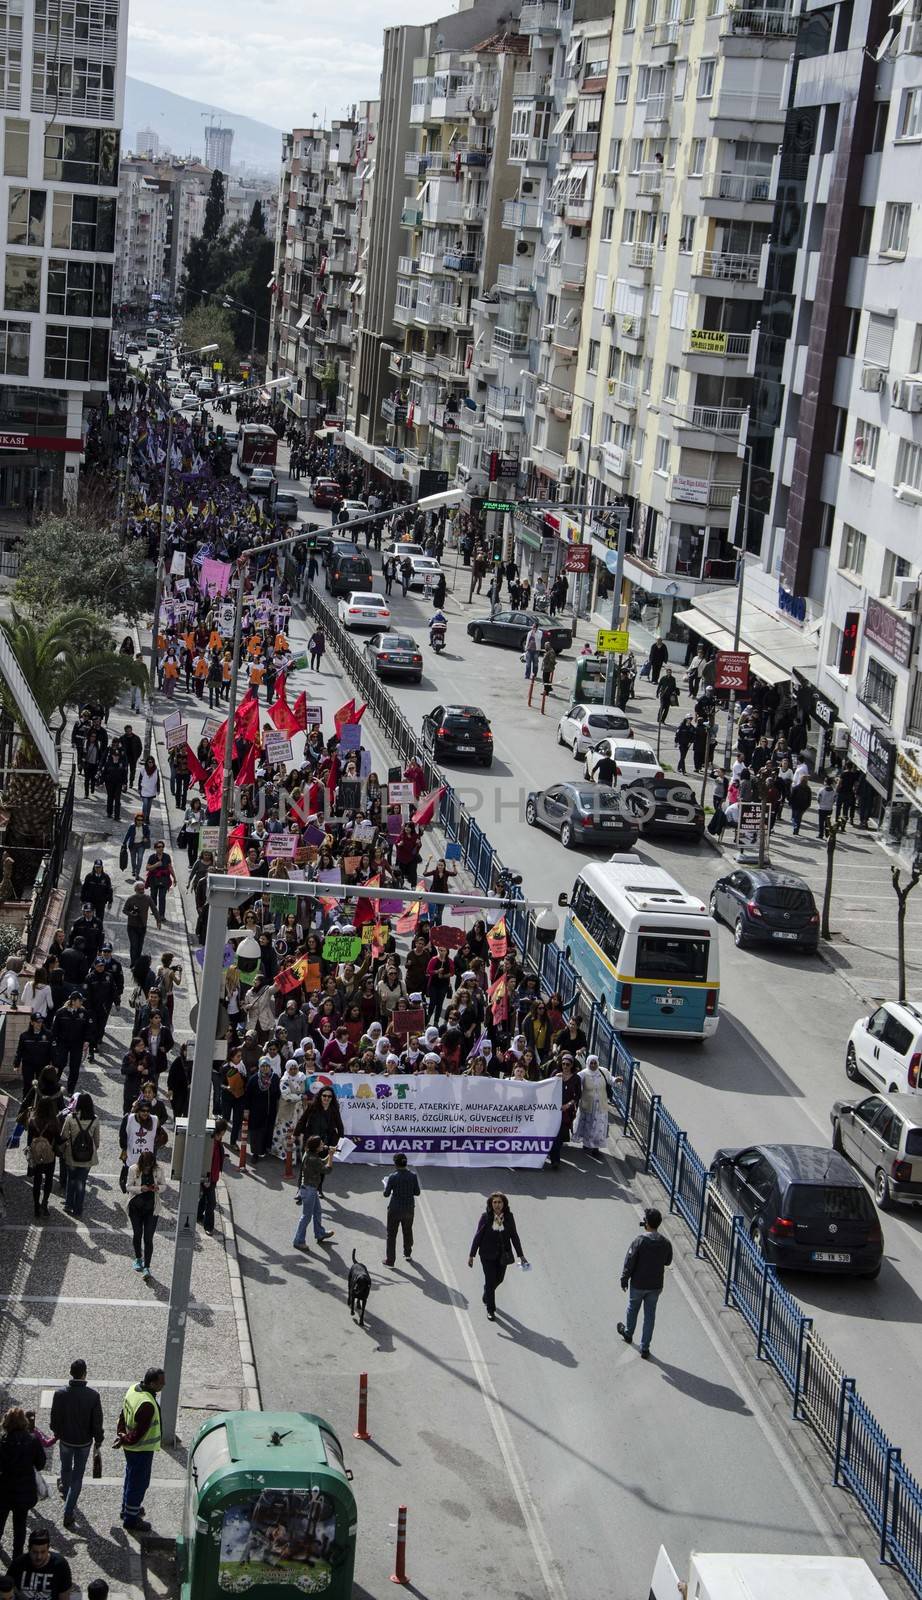 TURKEY, Izmir: Protesters march behind a banner during a demonstration held in Izmir, Turkey on March 6, 2016 prior to International Women's Day (March 8).